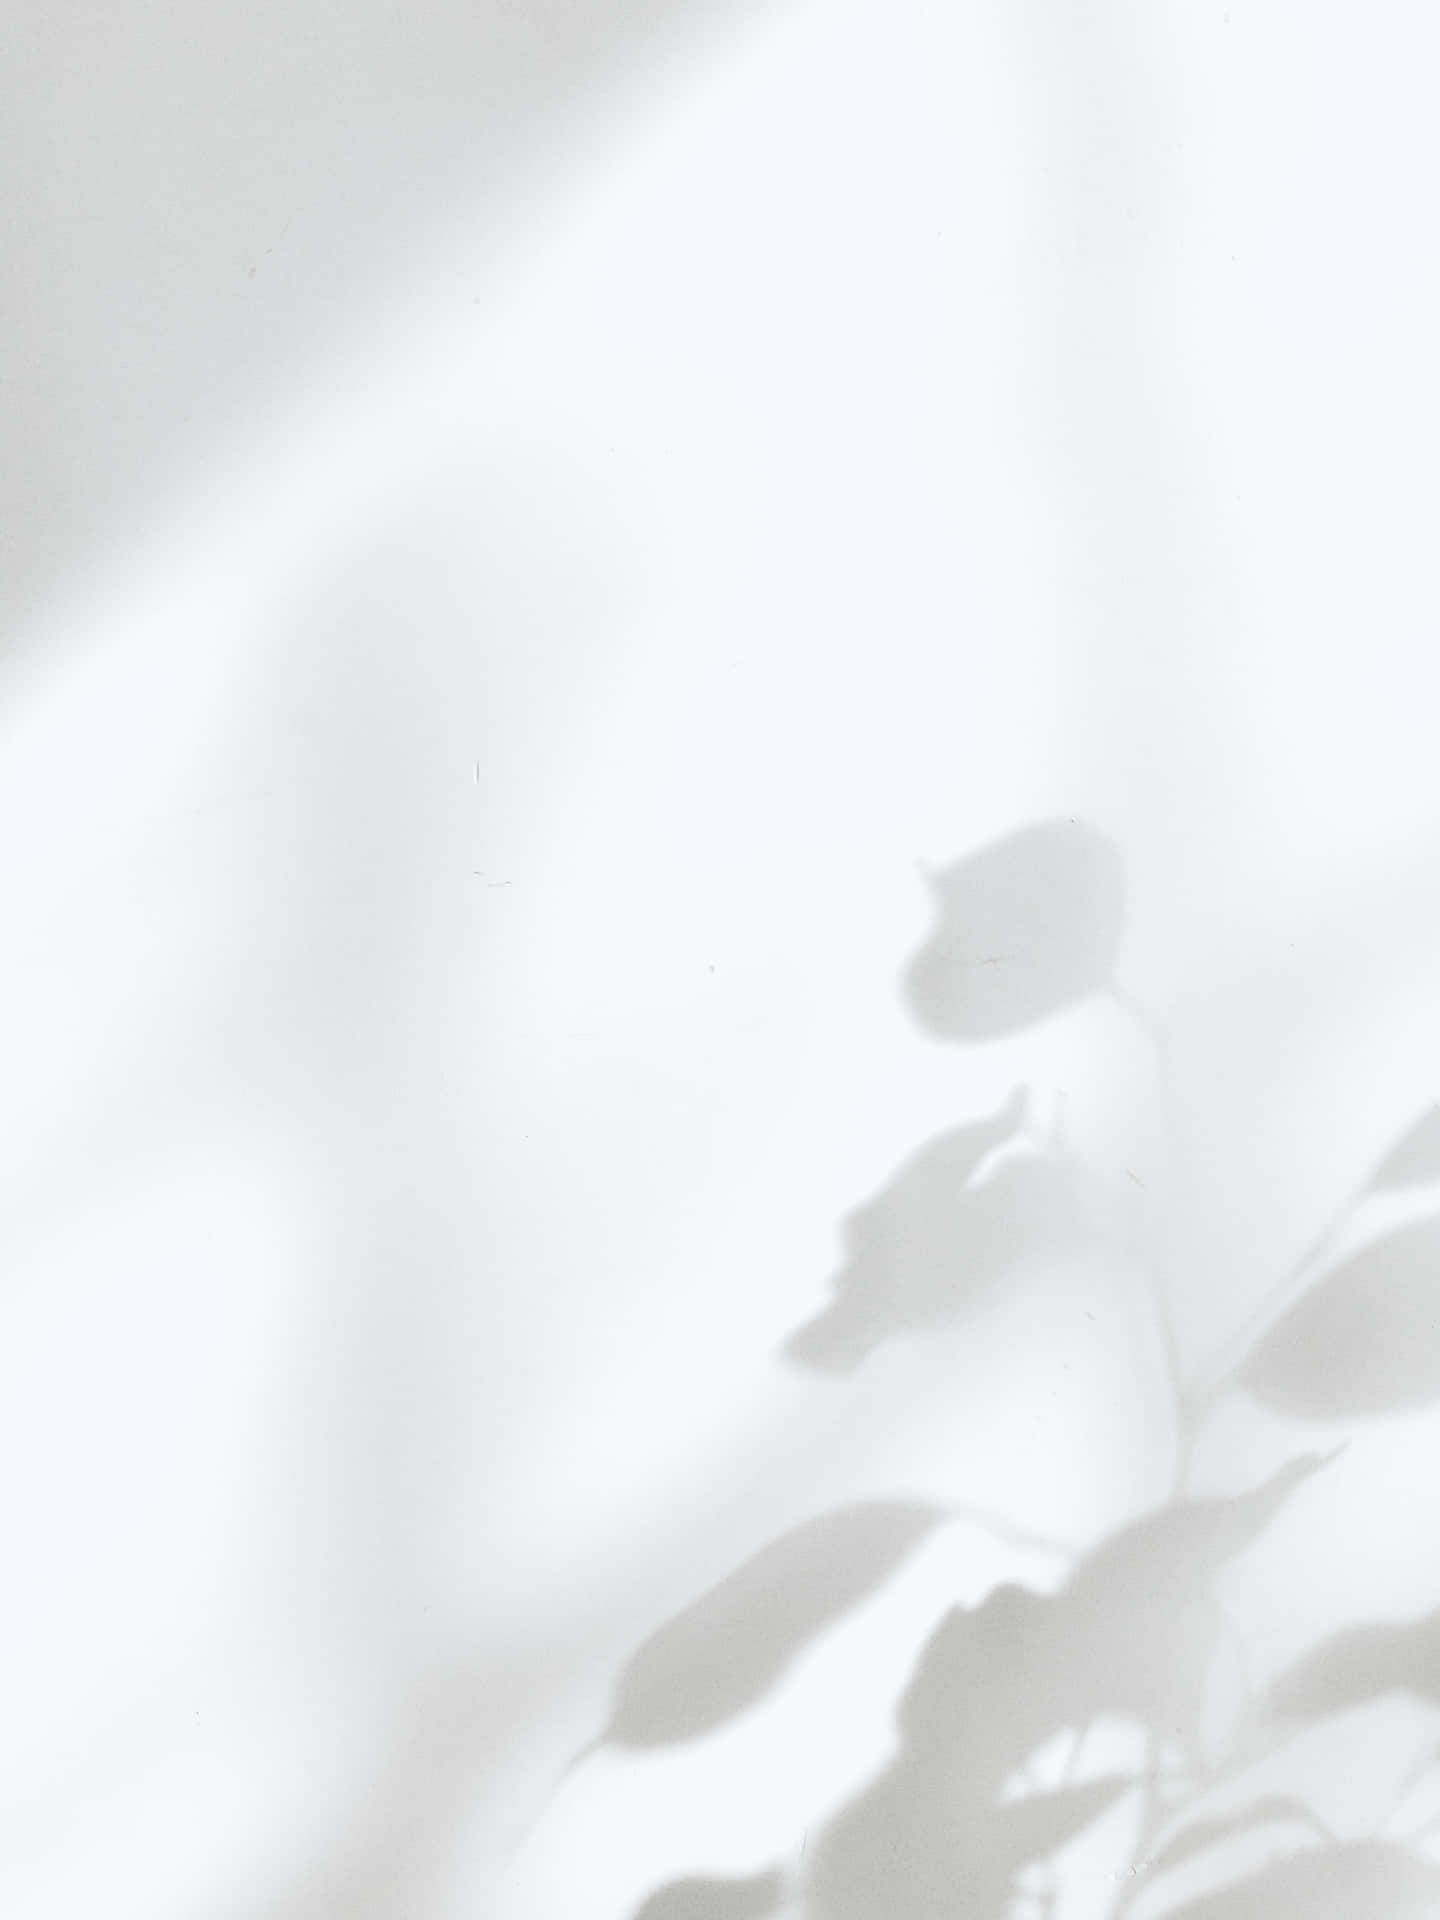 White Image Background Leaves Shadow